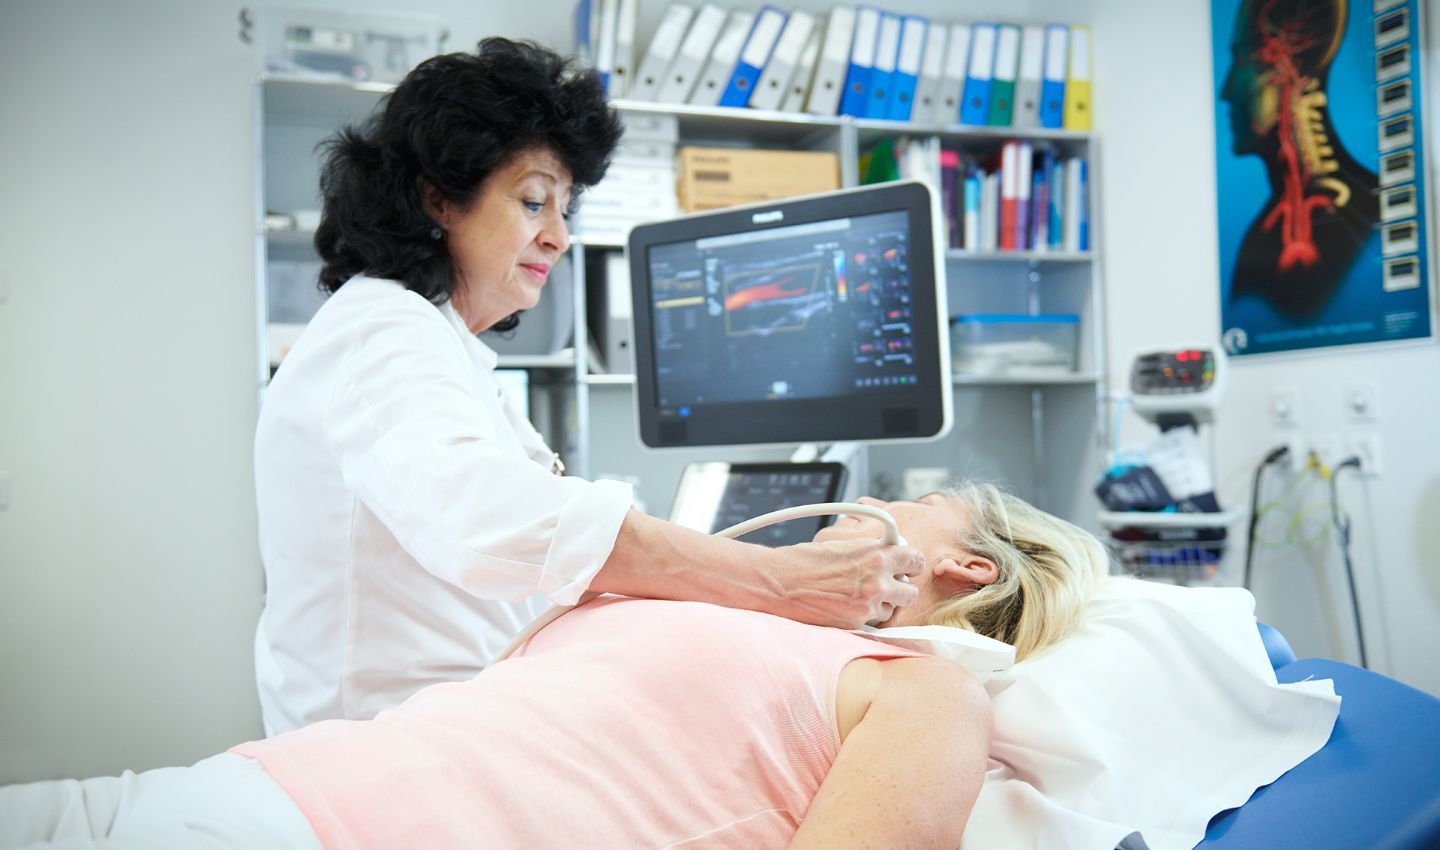 Physician performs neurovascular ultrasound examination on patient